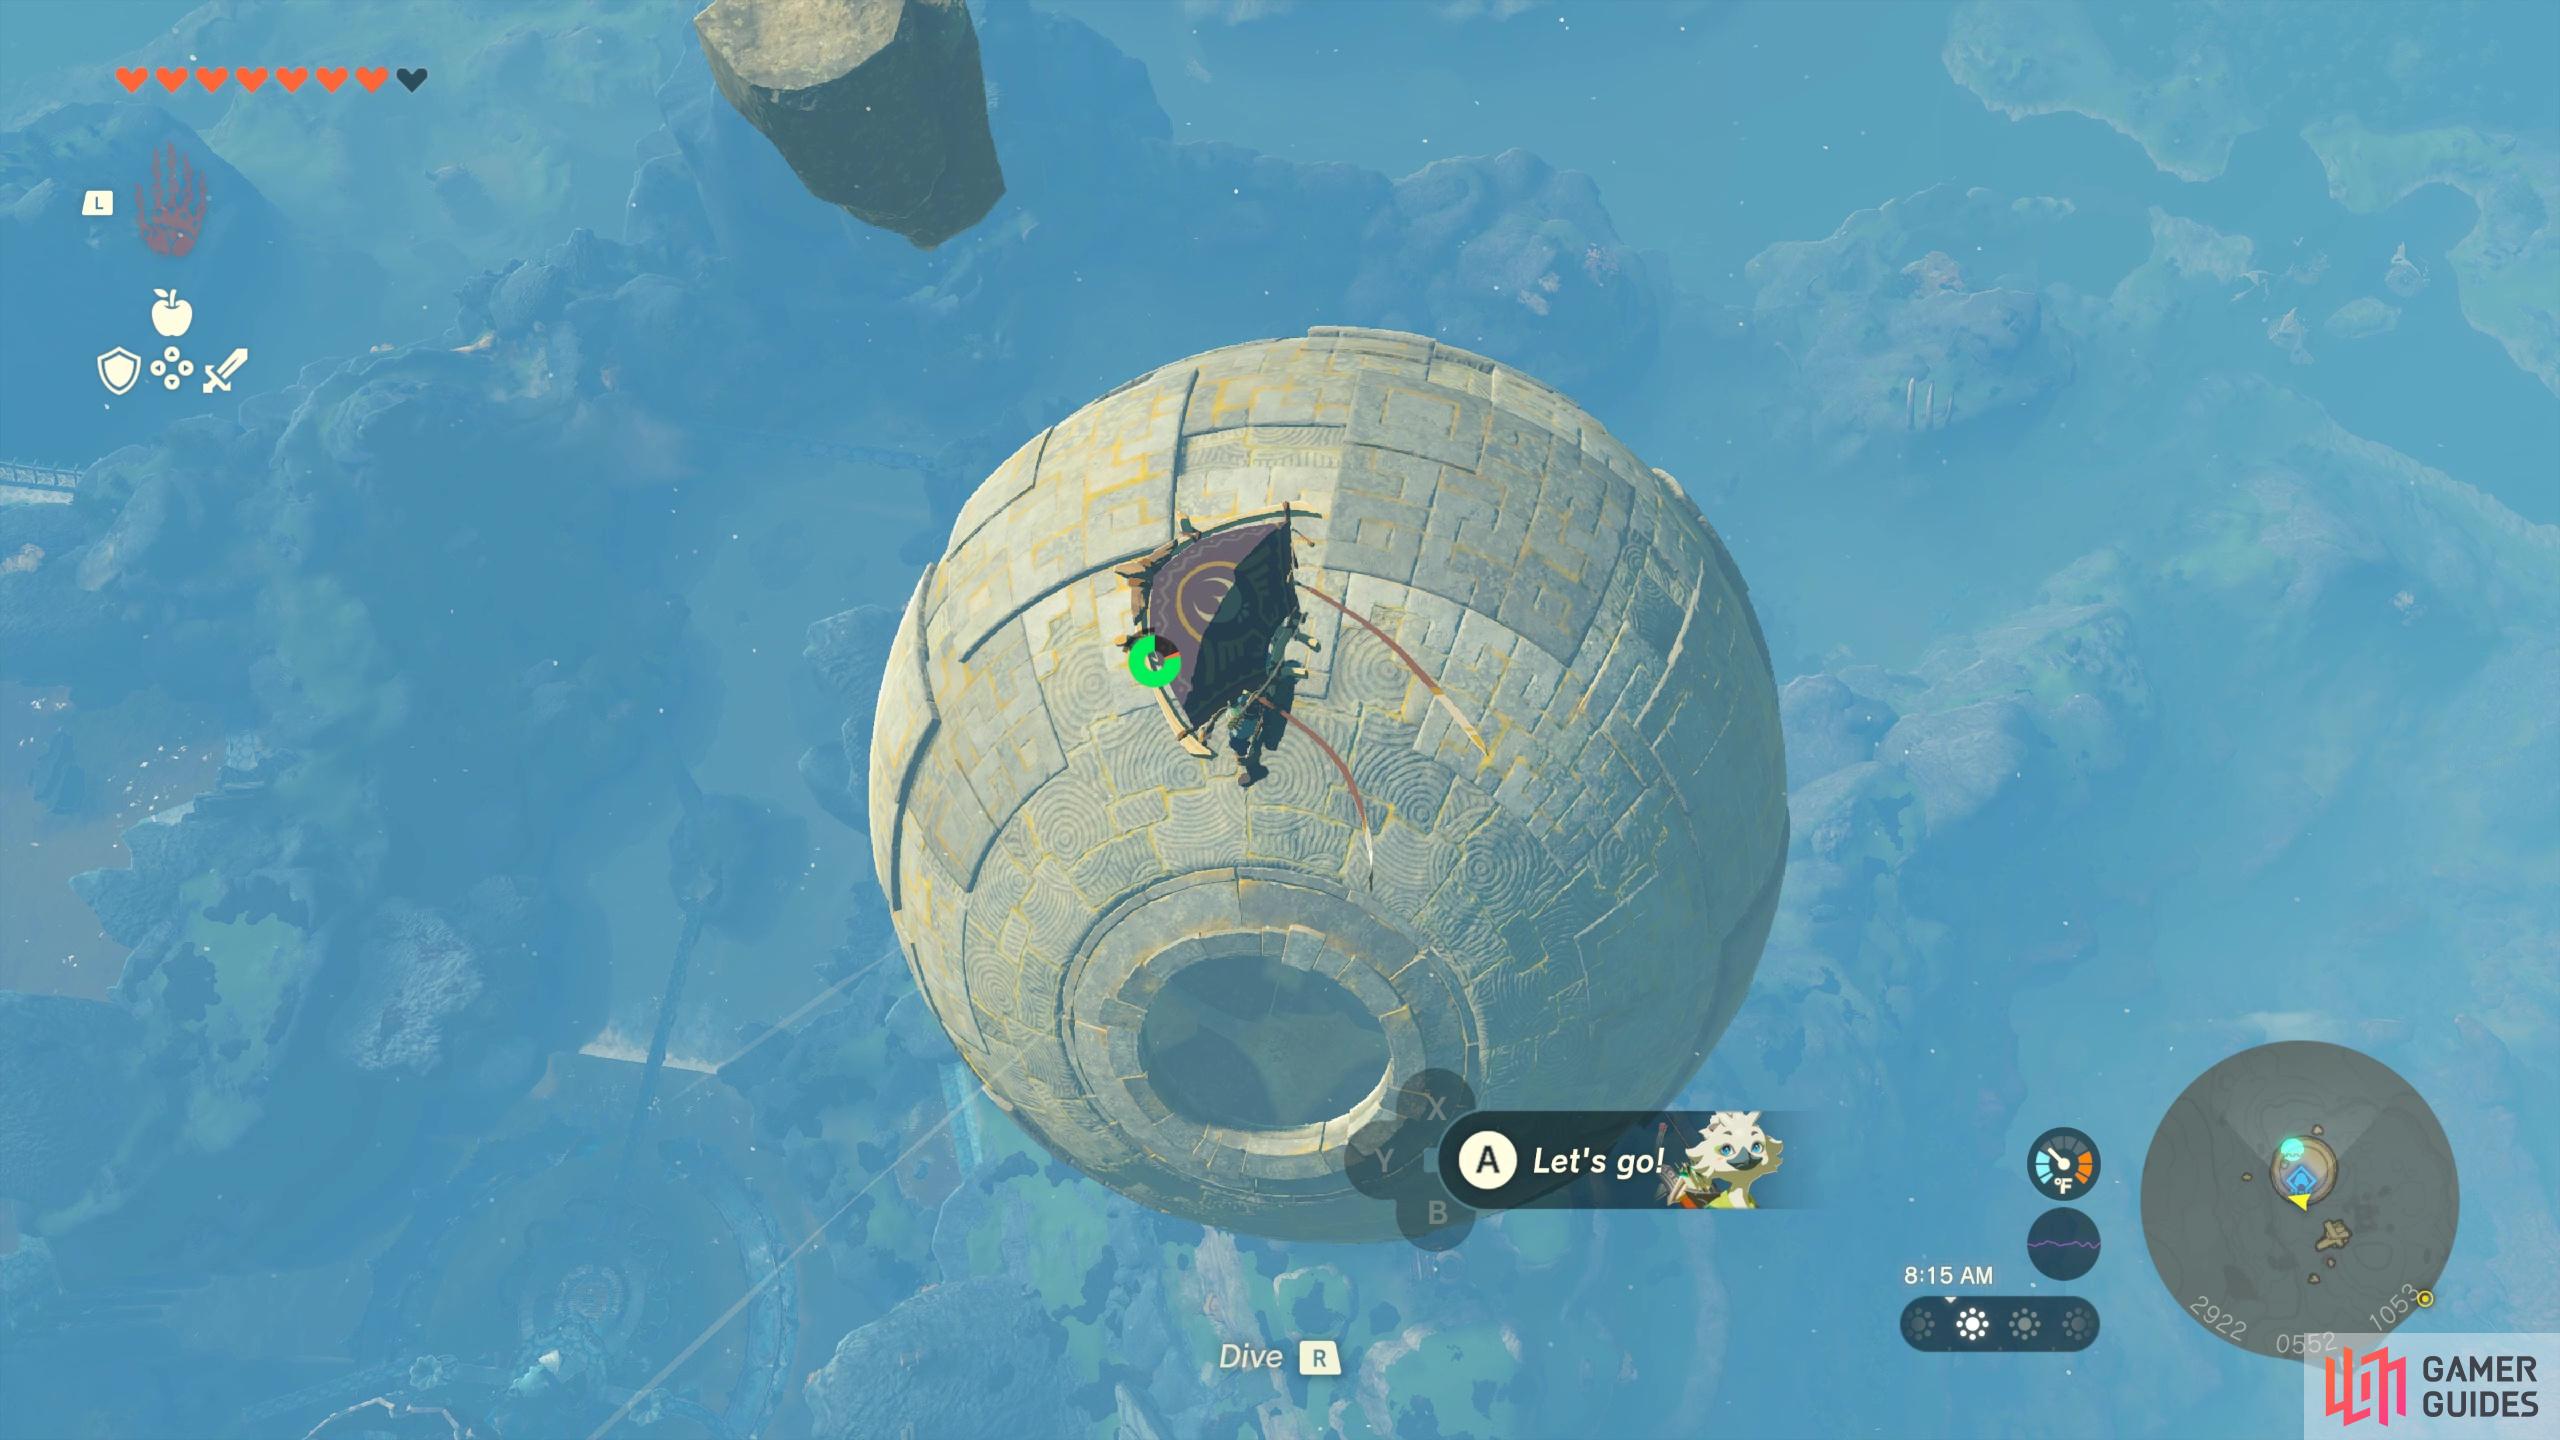 After launching out of Upland Zorana Skyview Tower, position yourself above this floating orb and drop down into it via the rotating hole. 